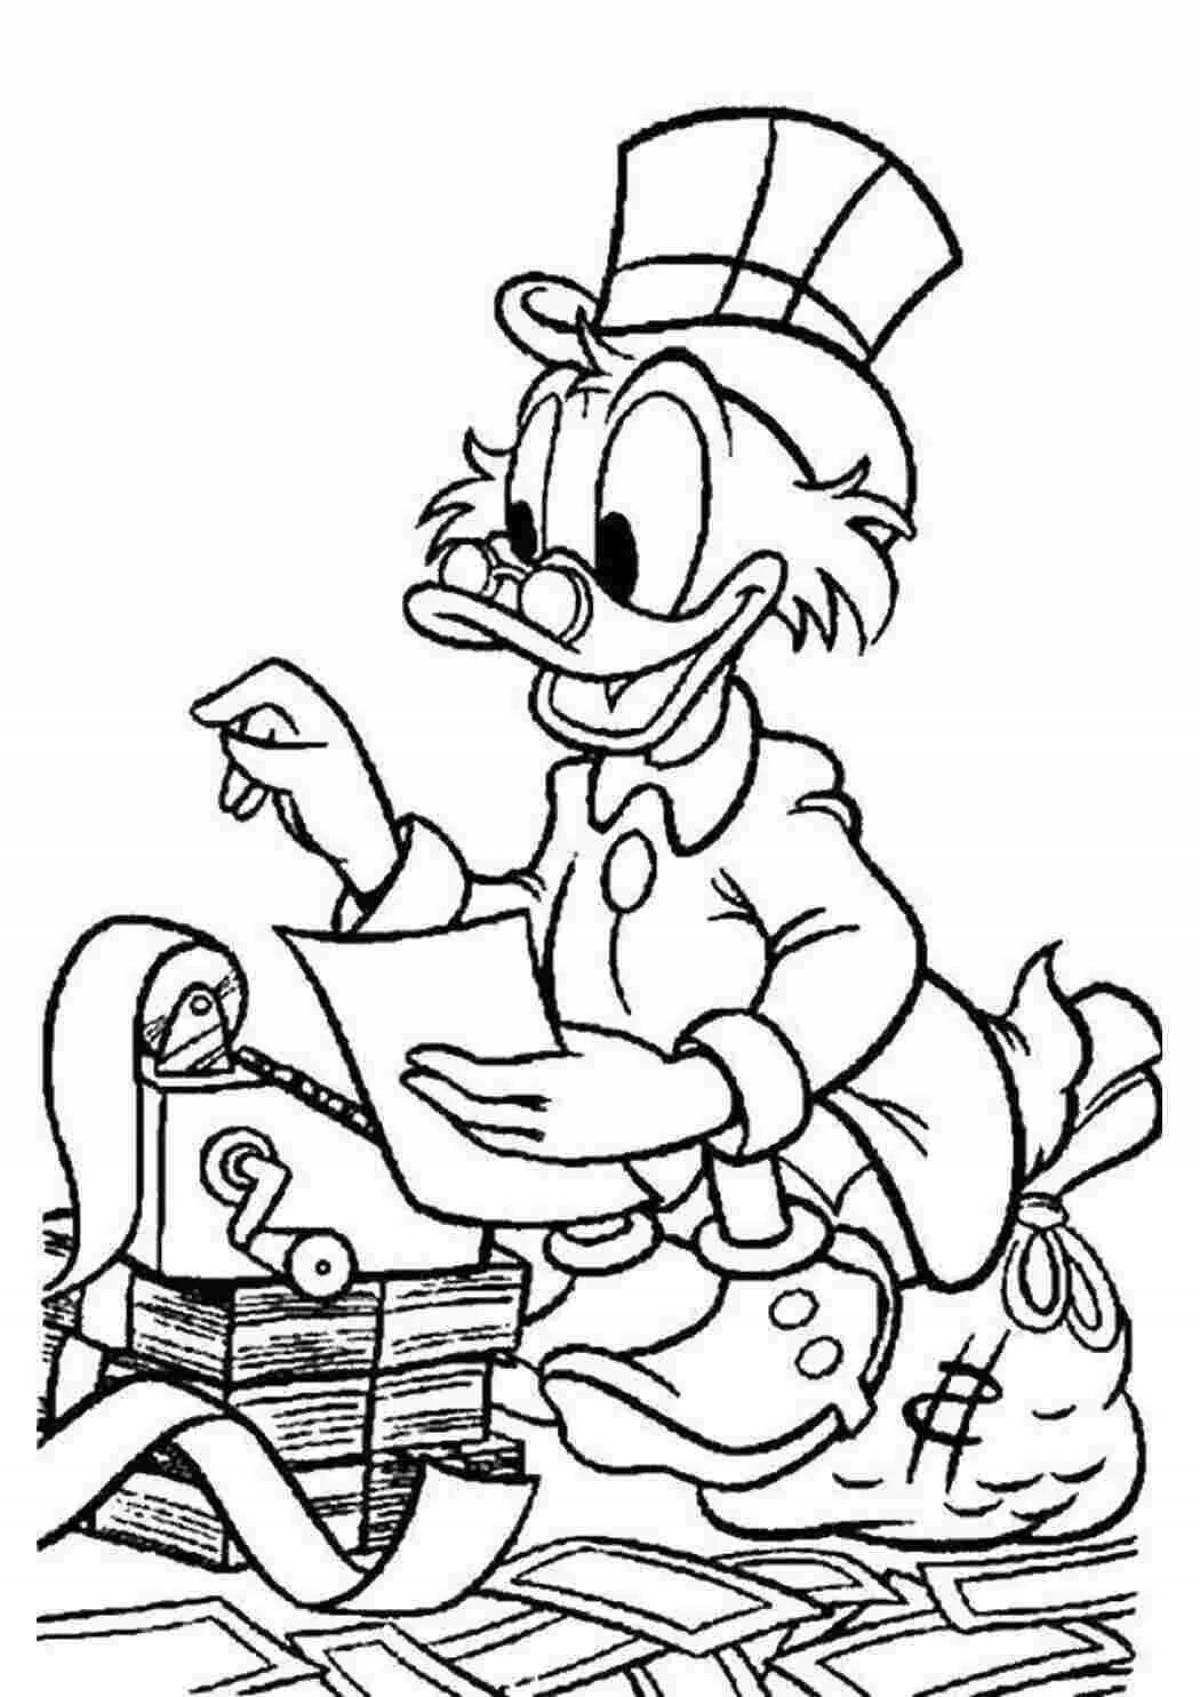 Scrooge mcduck with money #3